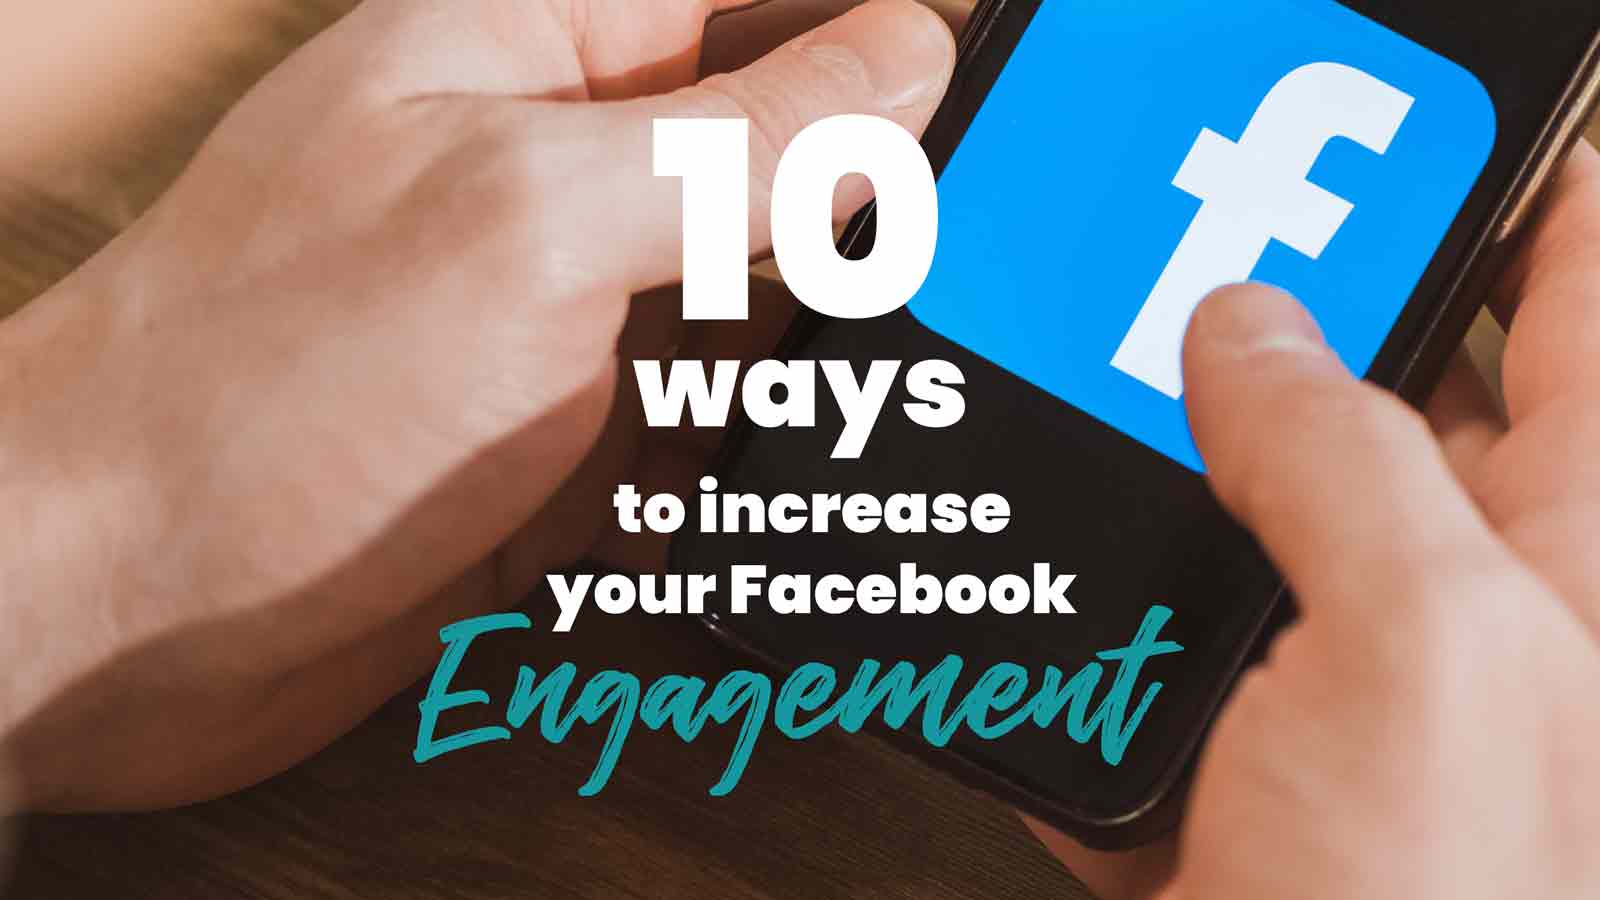 10 Ways to Increase Your Facebook Engagement